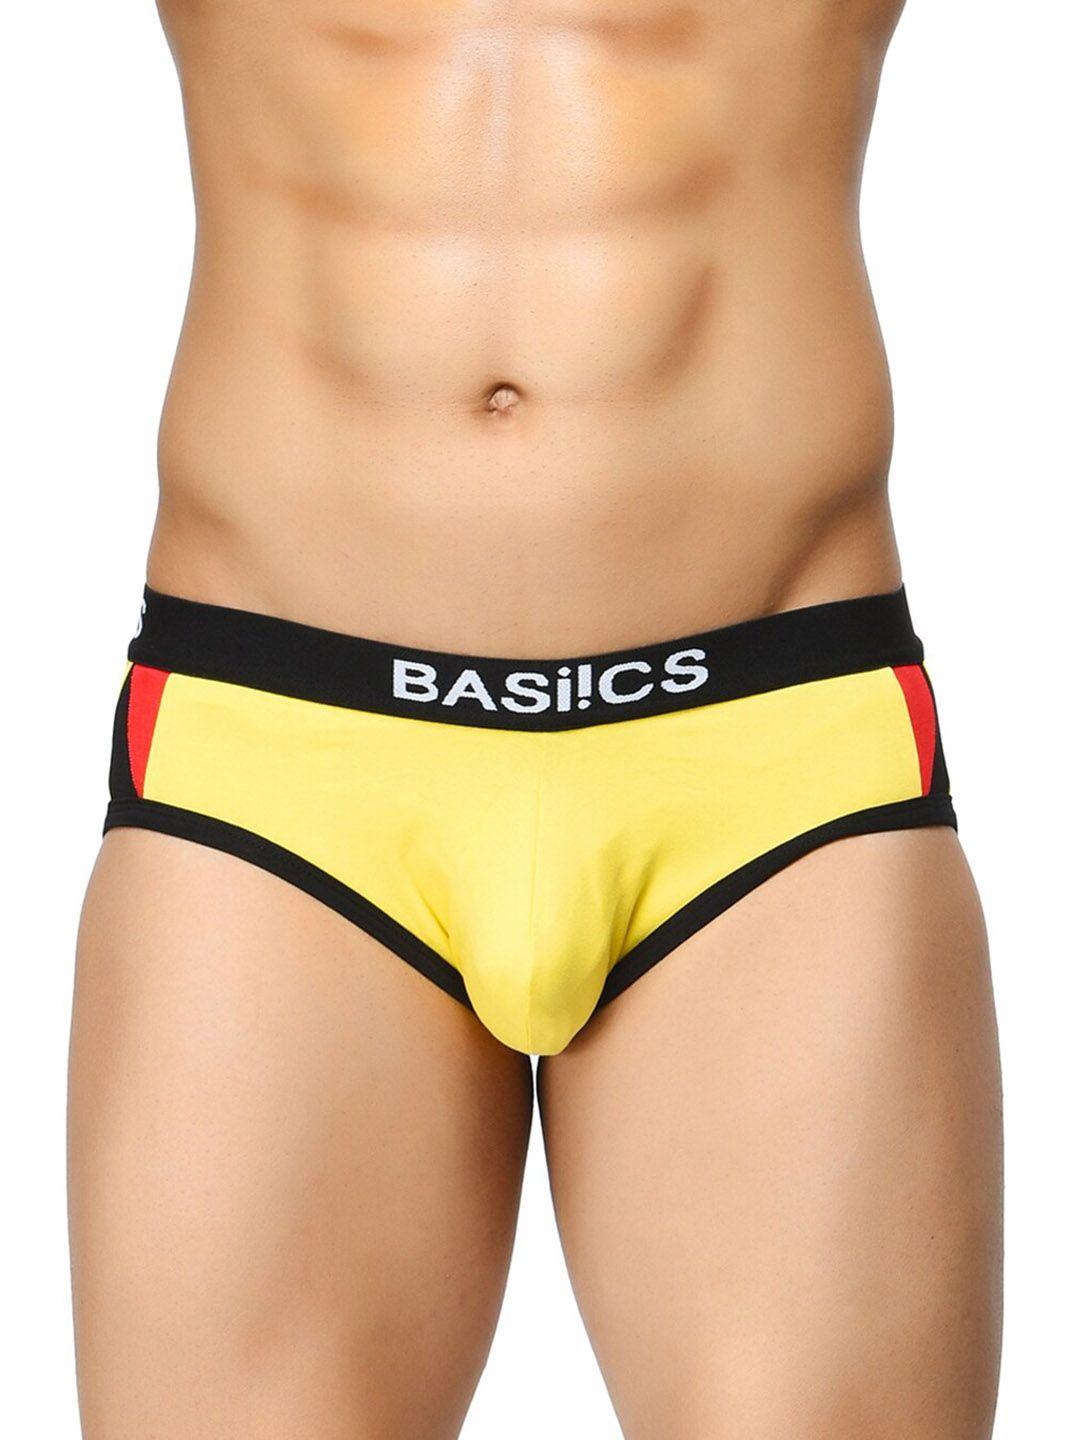 basiics-by-la-intimo-men-mid-rise-anti-bacterial-basic-briefs